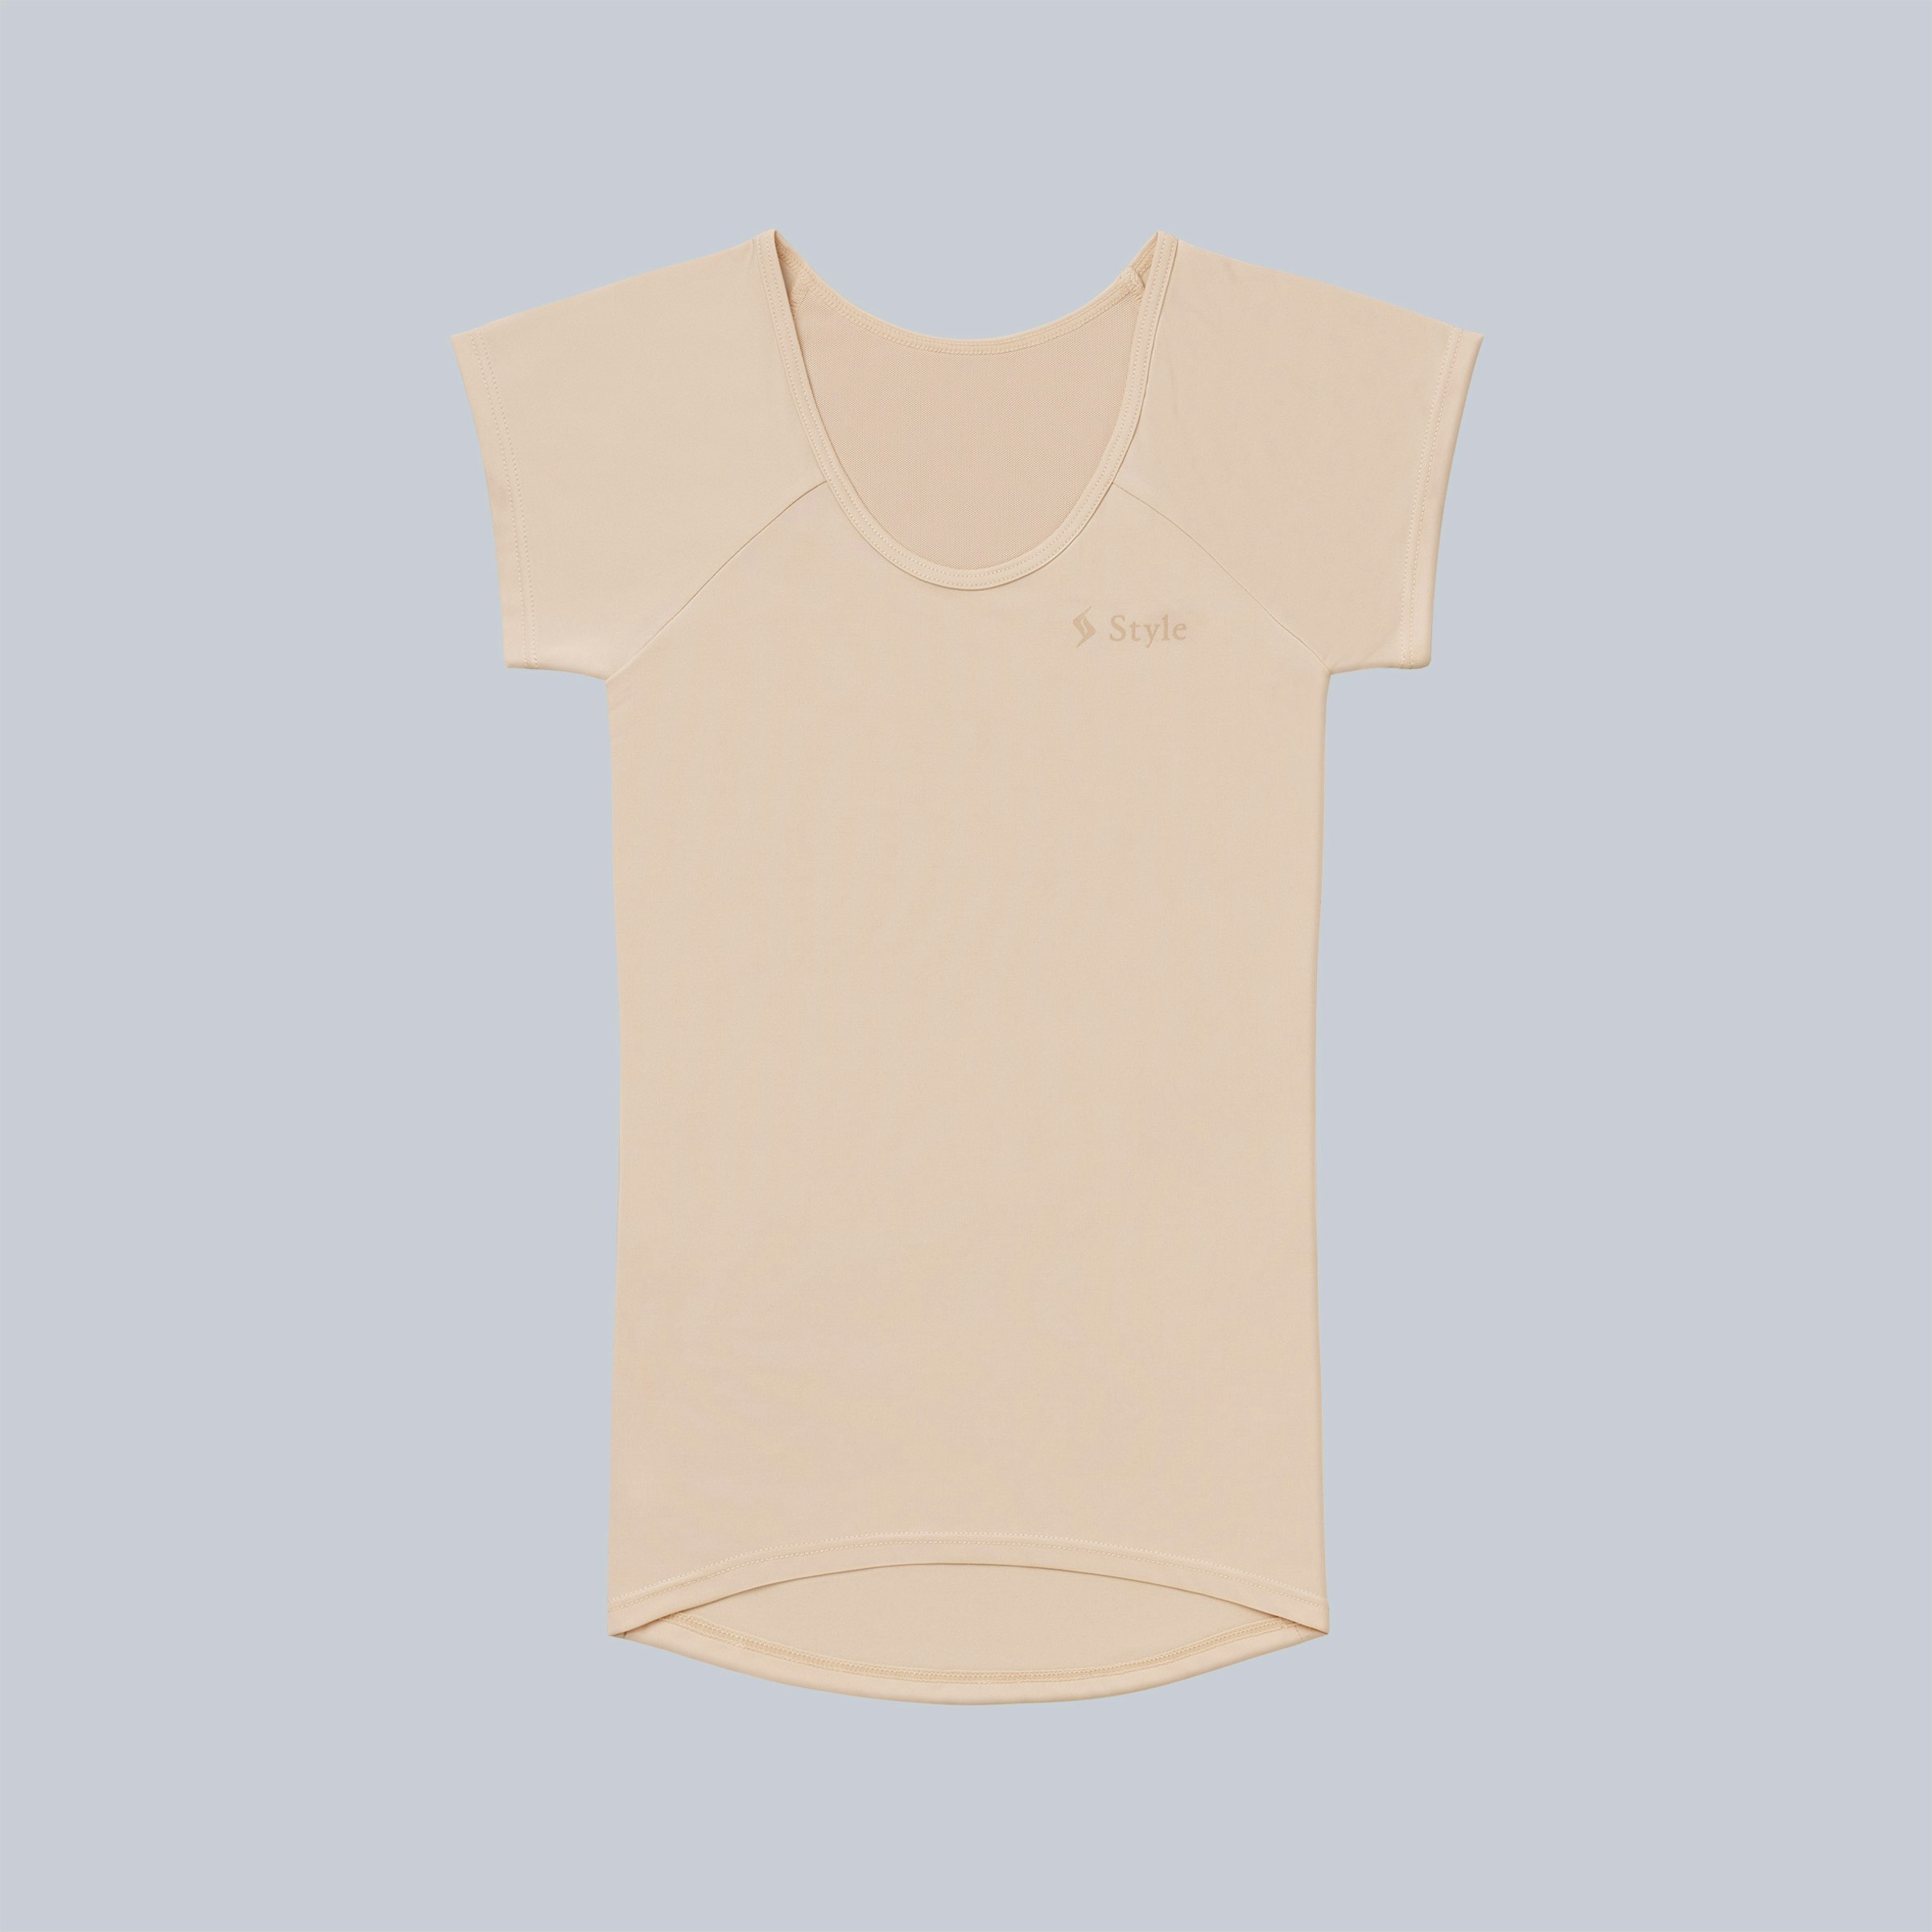 Ladies' U-neck in 2 colors – beige and black. 3,480 yen (tax included)